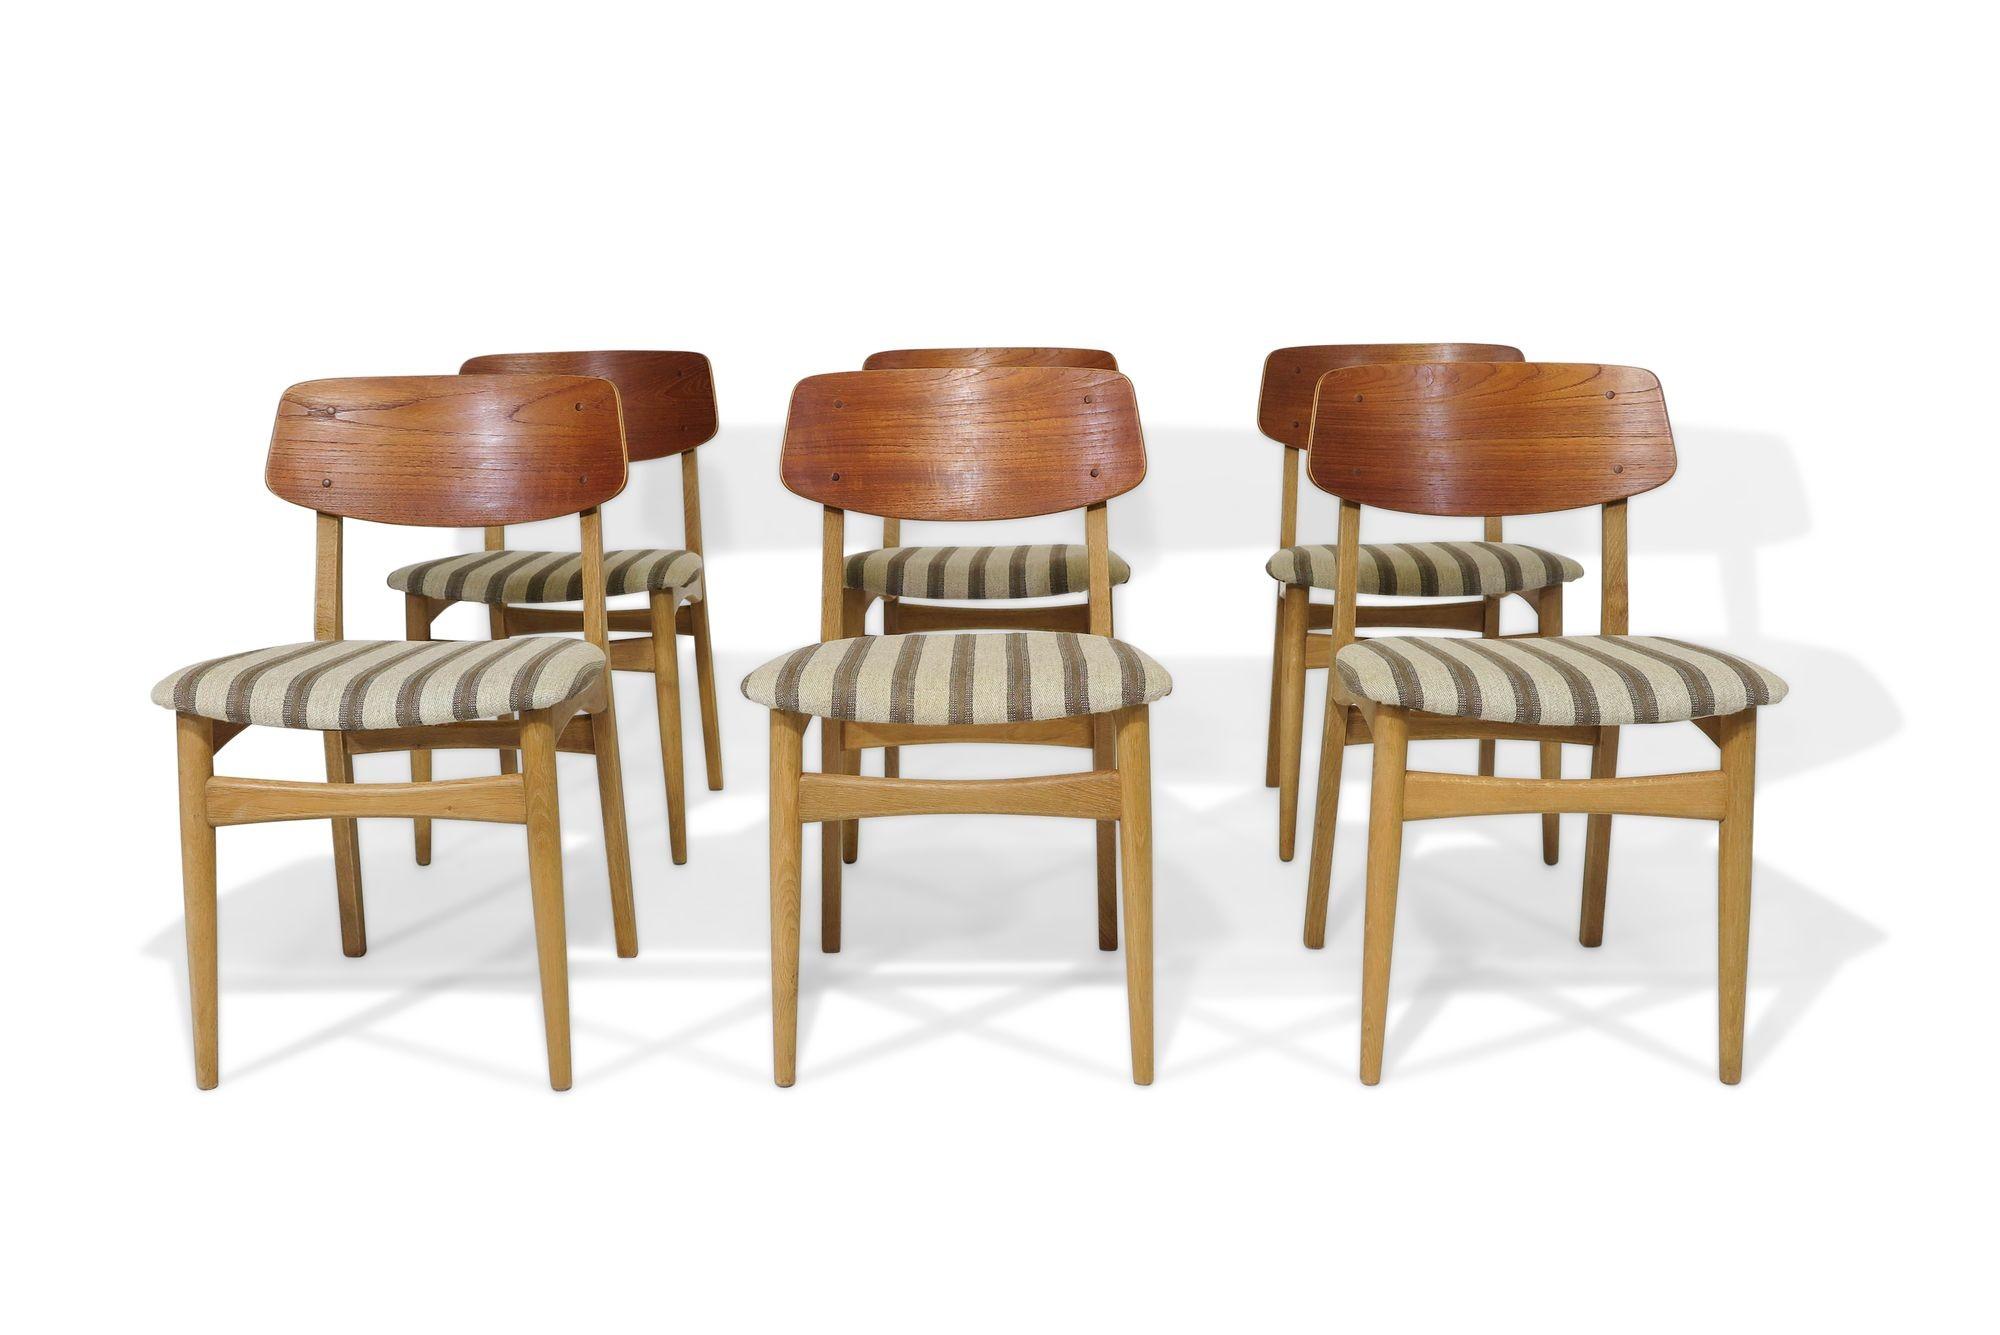 6 Danish dining chairs with teak backs on solid white oak frames. Seats covered in the original wool striped fabric. Wood has been professionally restored. Custom upholstery available upon request. 
Measurements W 18.75'' x D 19.50'' x H